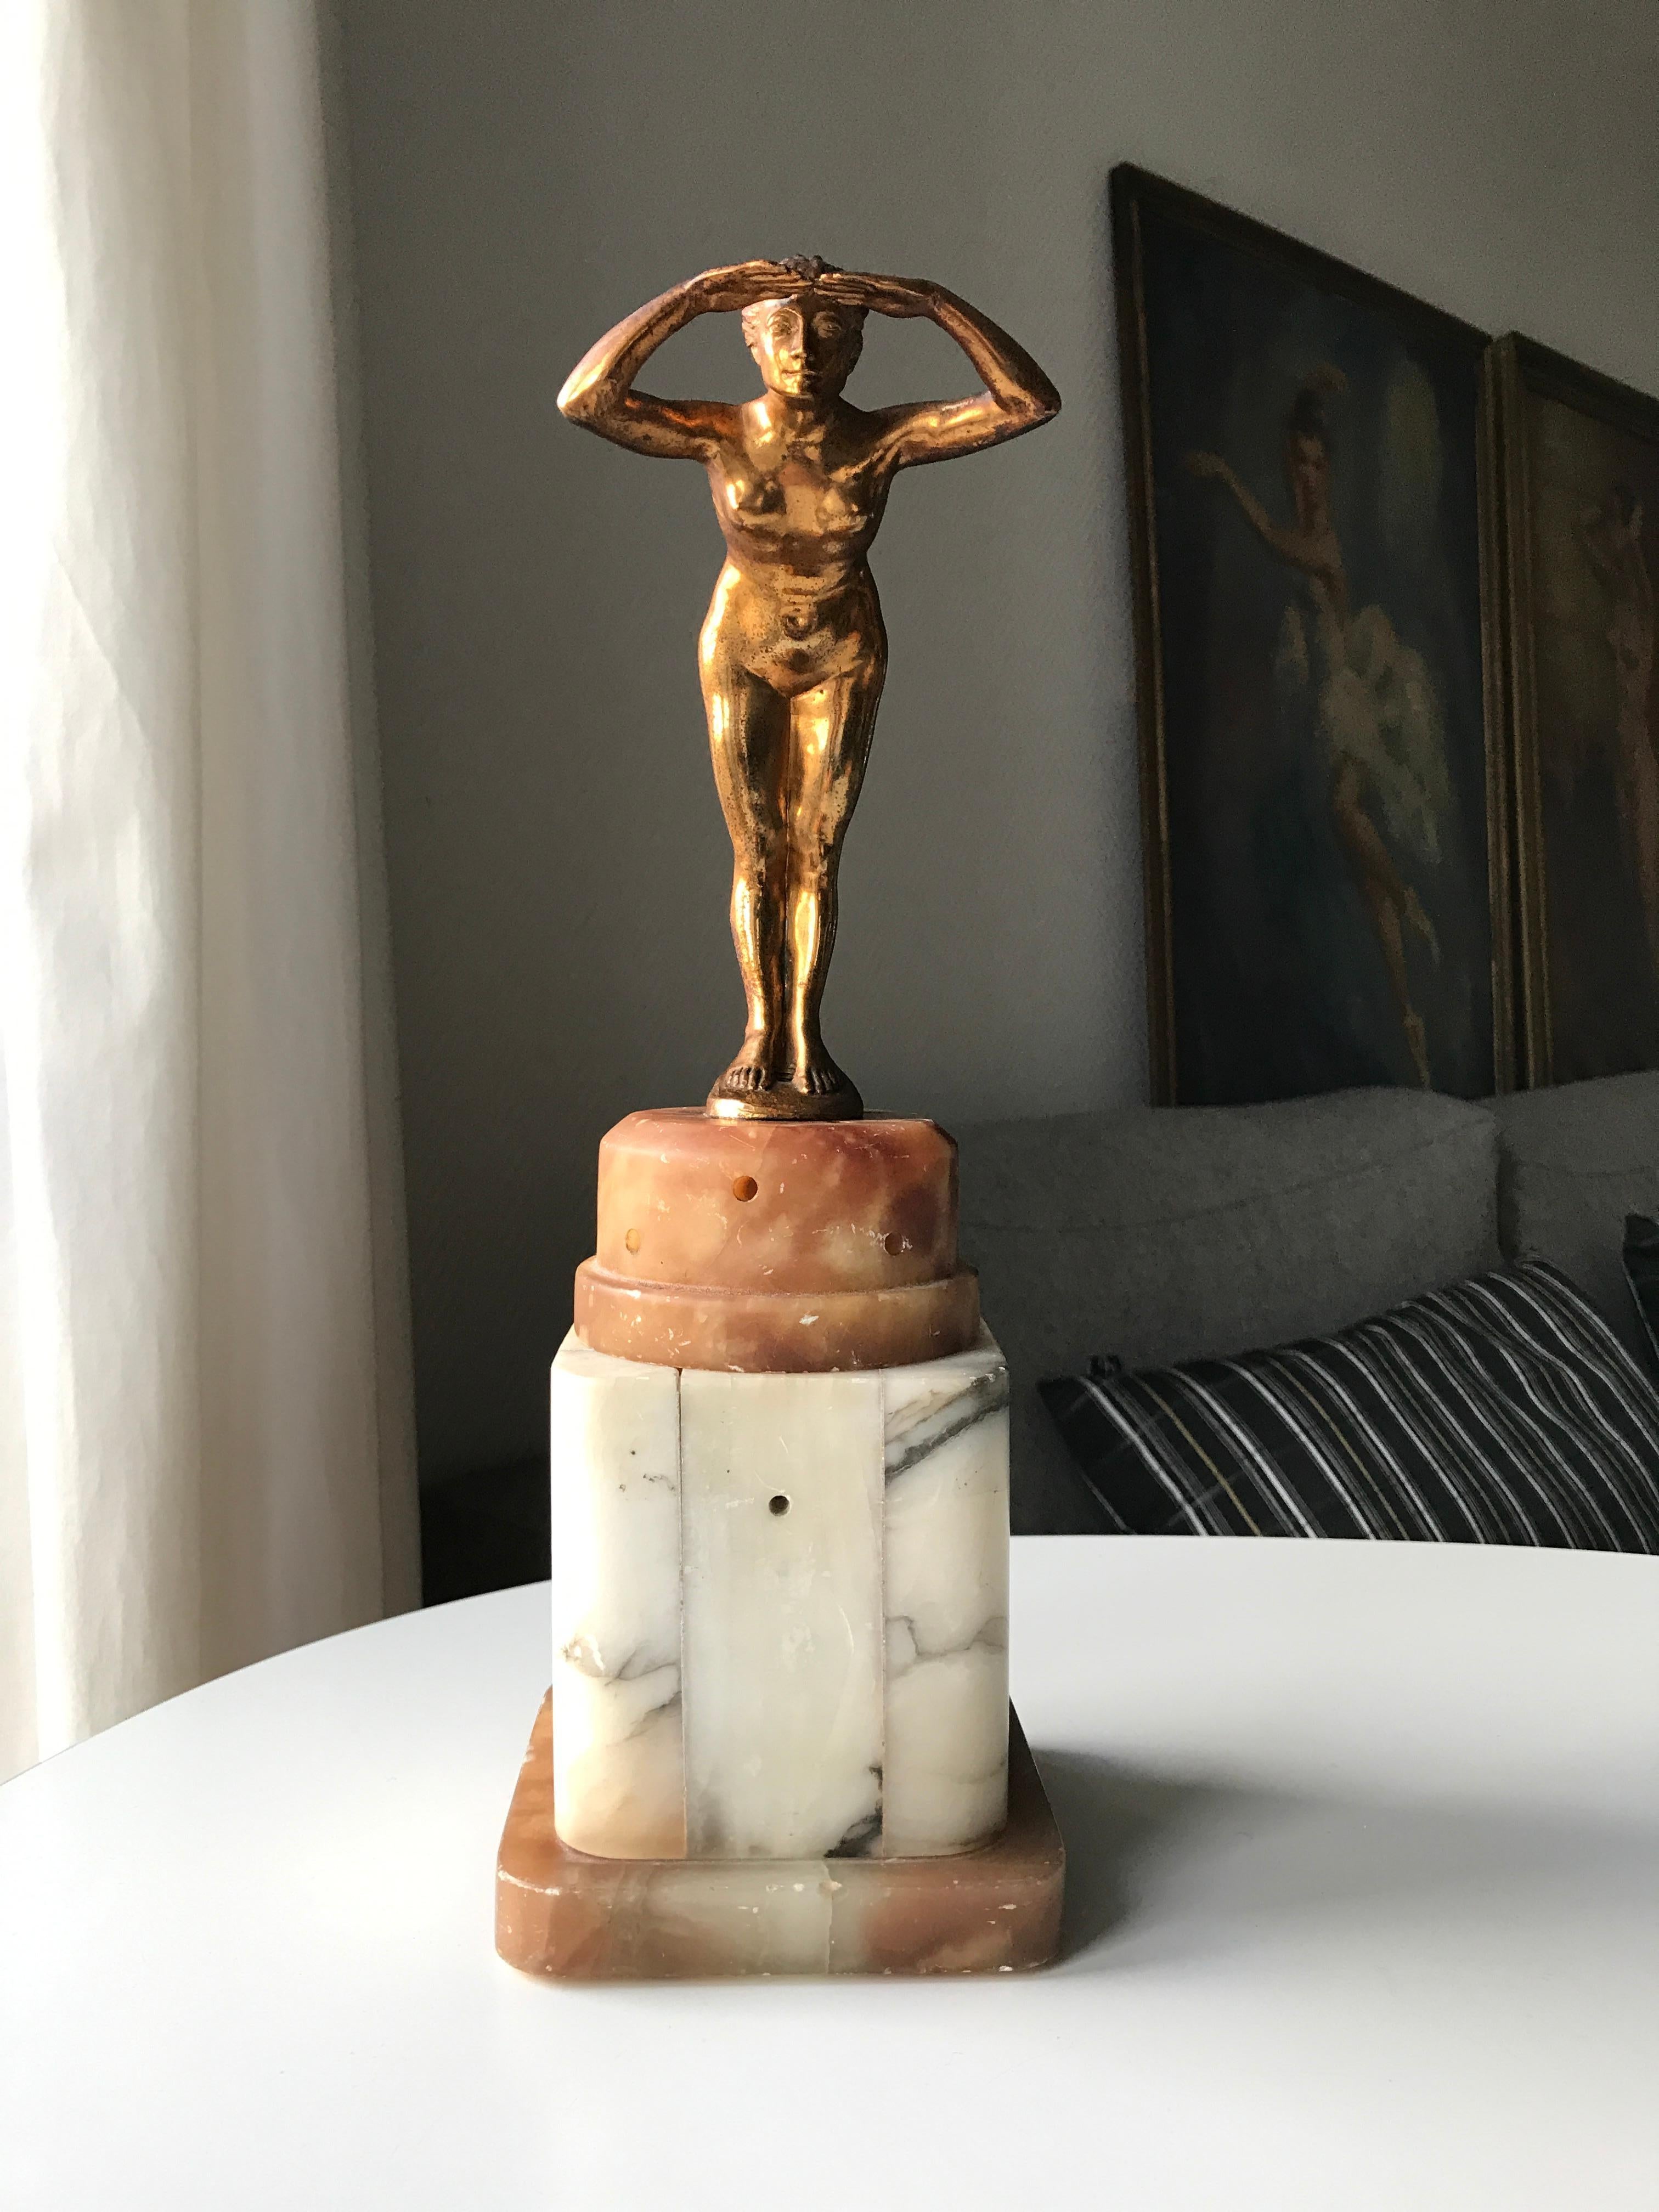 Art Deco table lamp with figurine of Naked Lady. Lamp base in two colored alabaster with marble effects. Figurine of beautiful woman made of guilted metal scouting into the horizon. The base has a function as an ozon / perfume lamp. This meant that